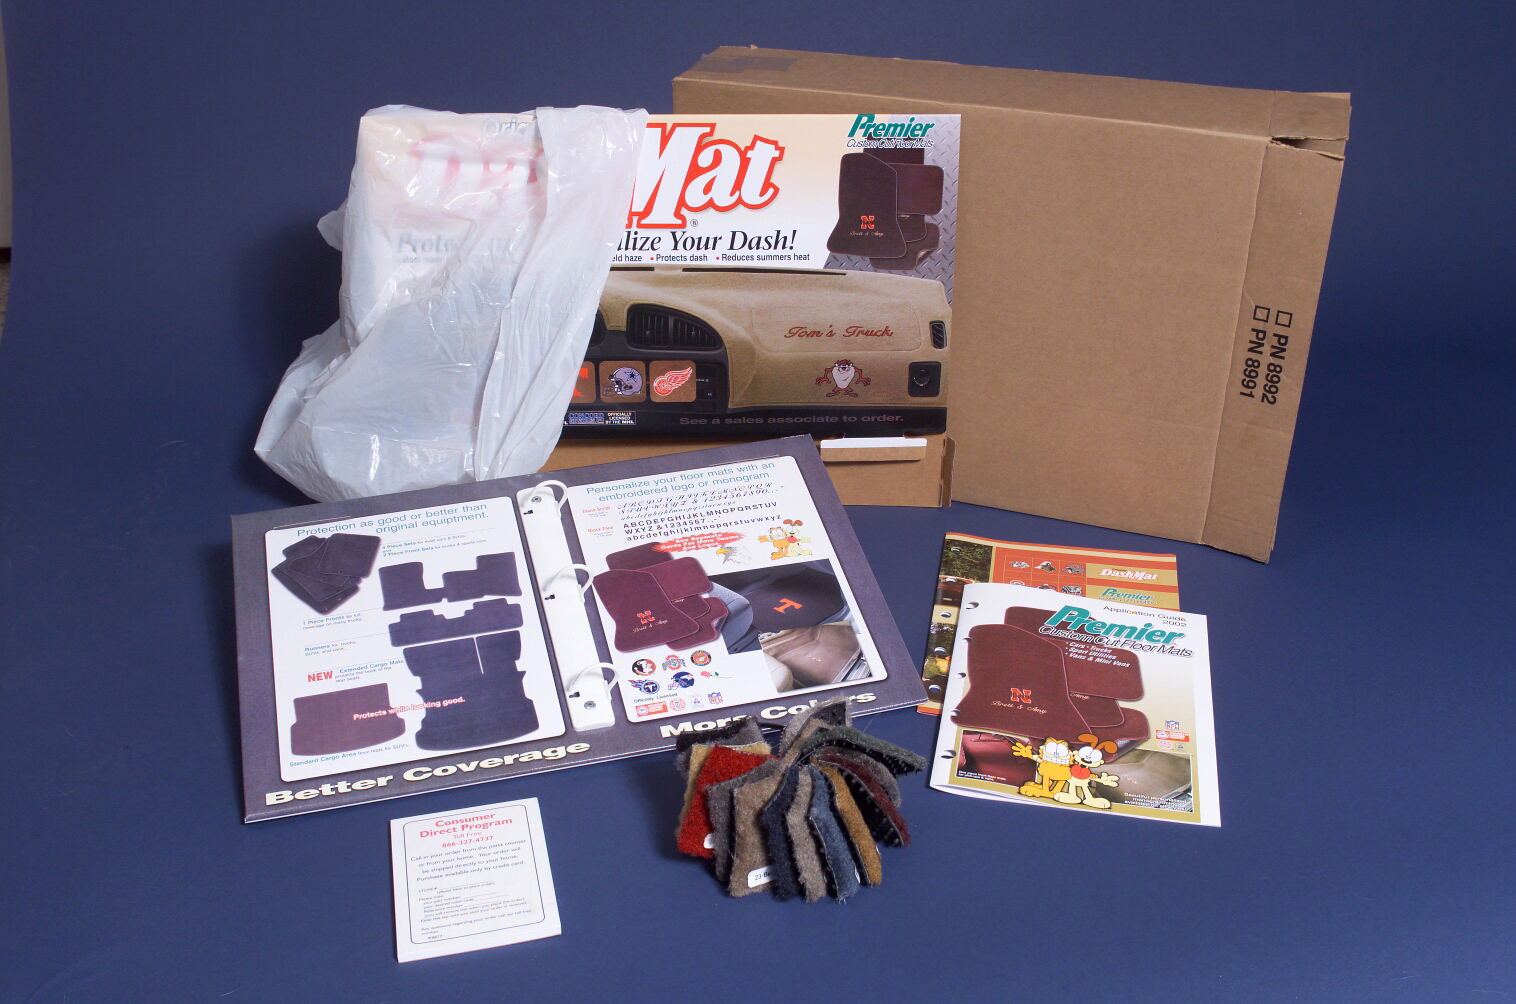 An assortment of boxes and packaging